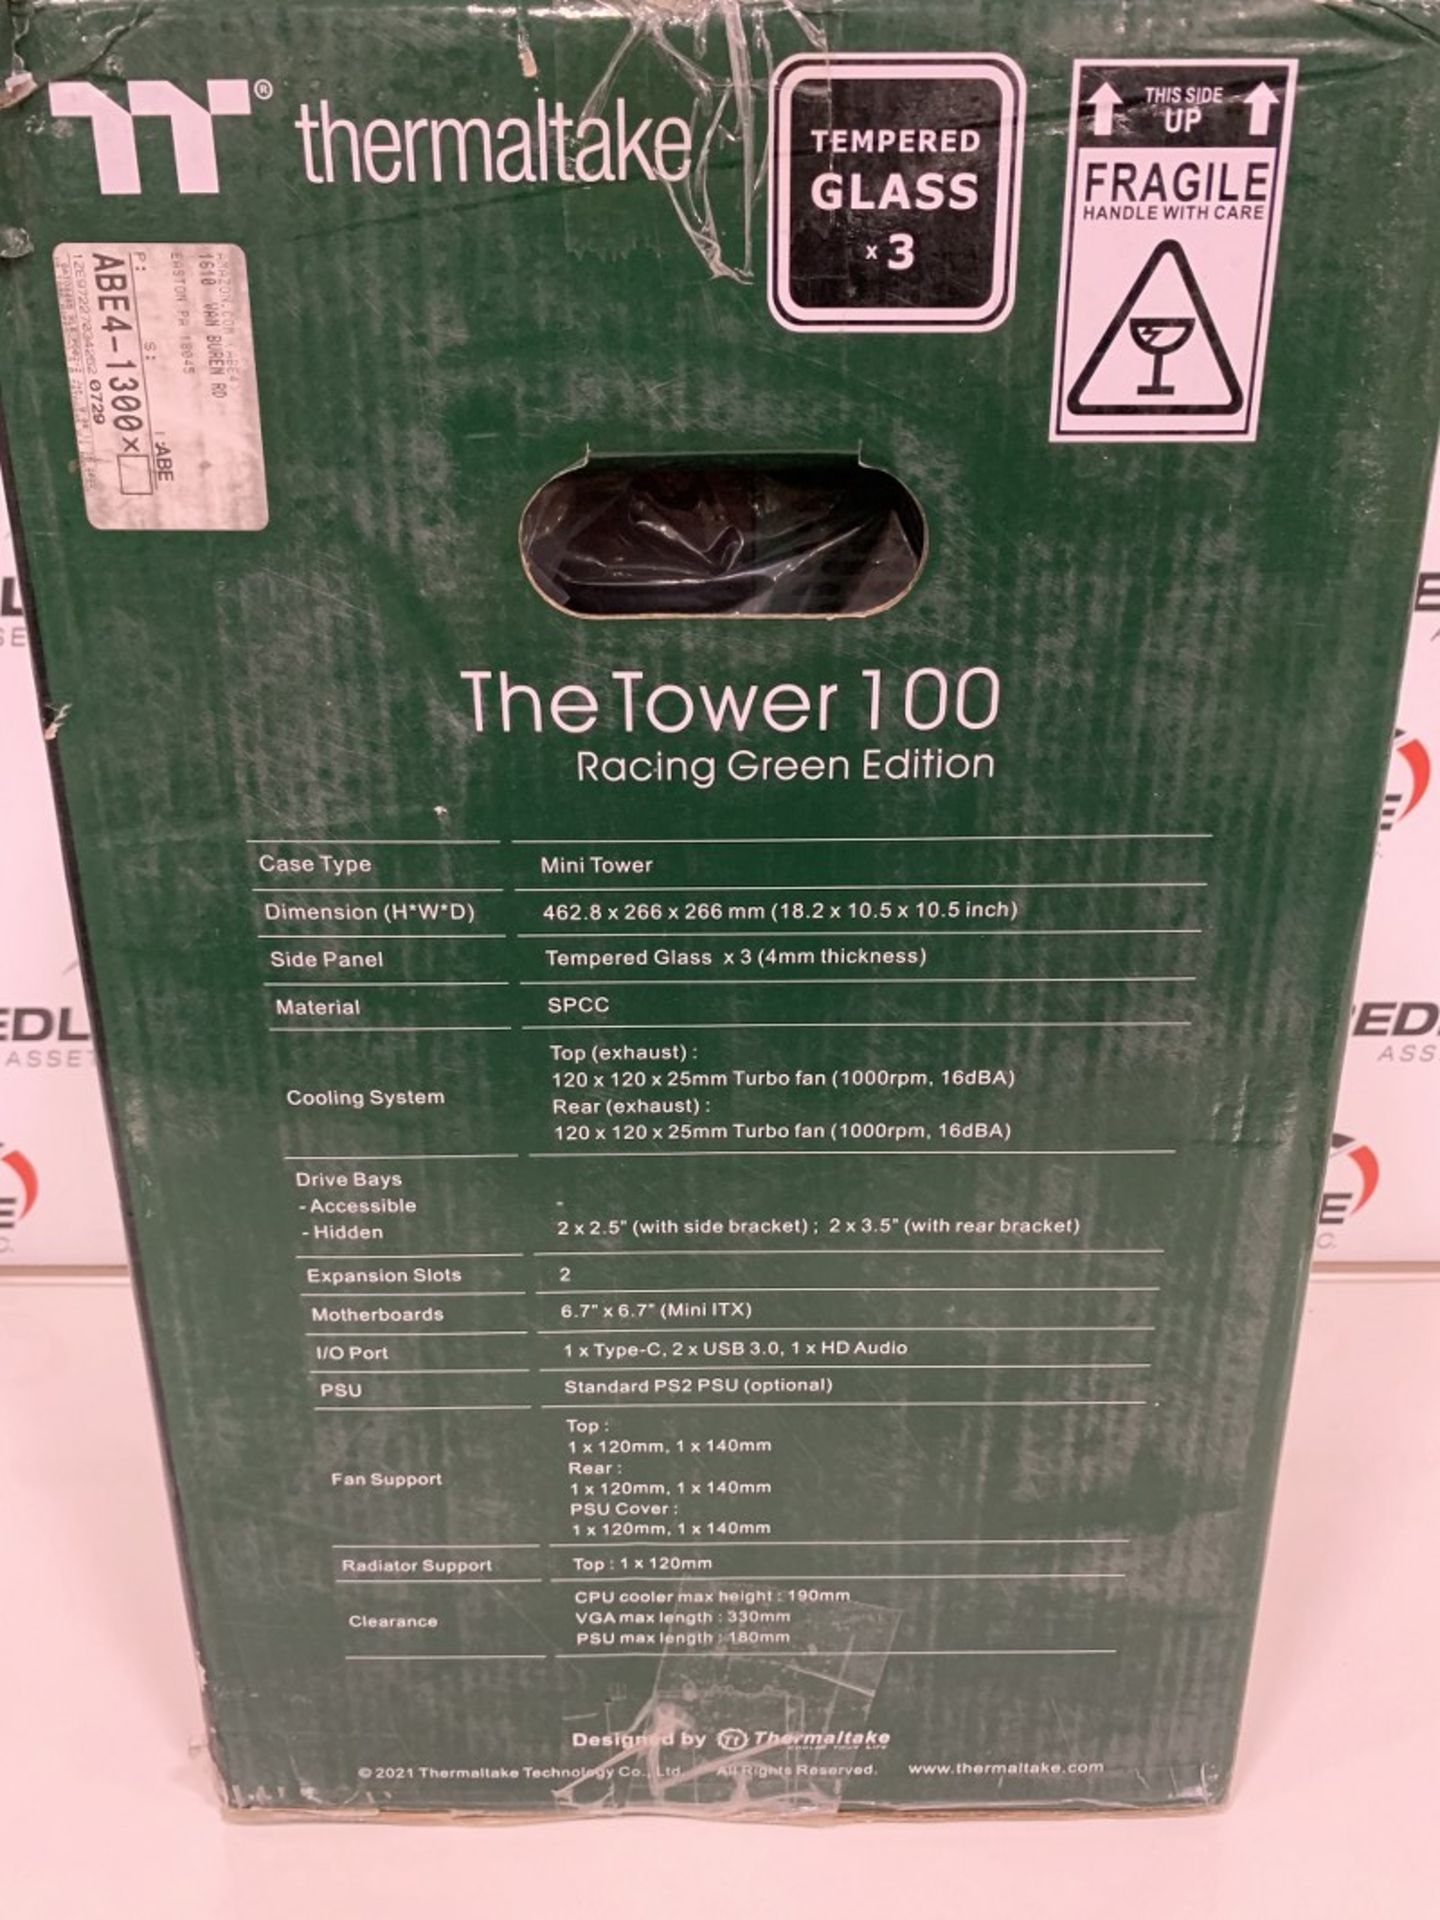 THERMALTAKE - THE TOWER 100 MNI TOWER PC CASE W/ TEMPERED GLASS - Image 2 of 3